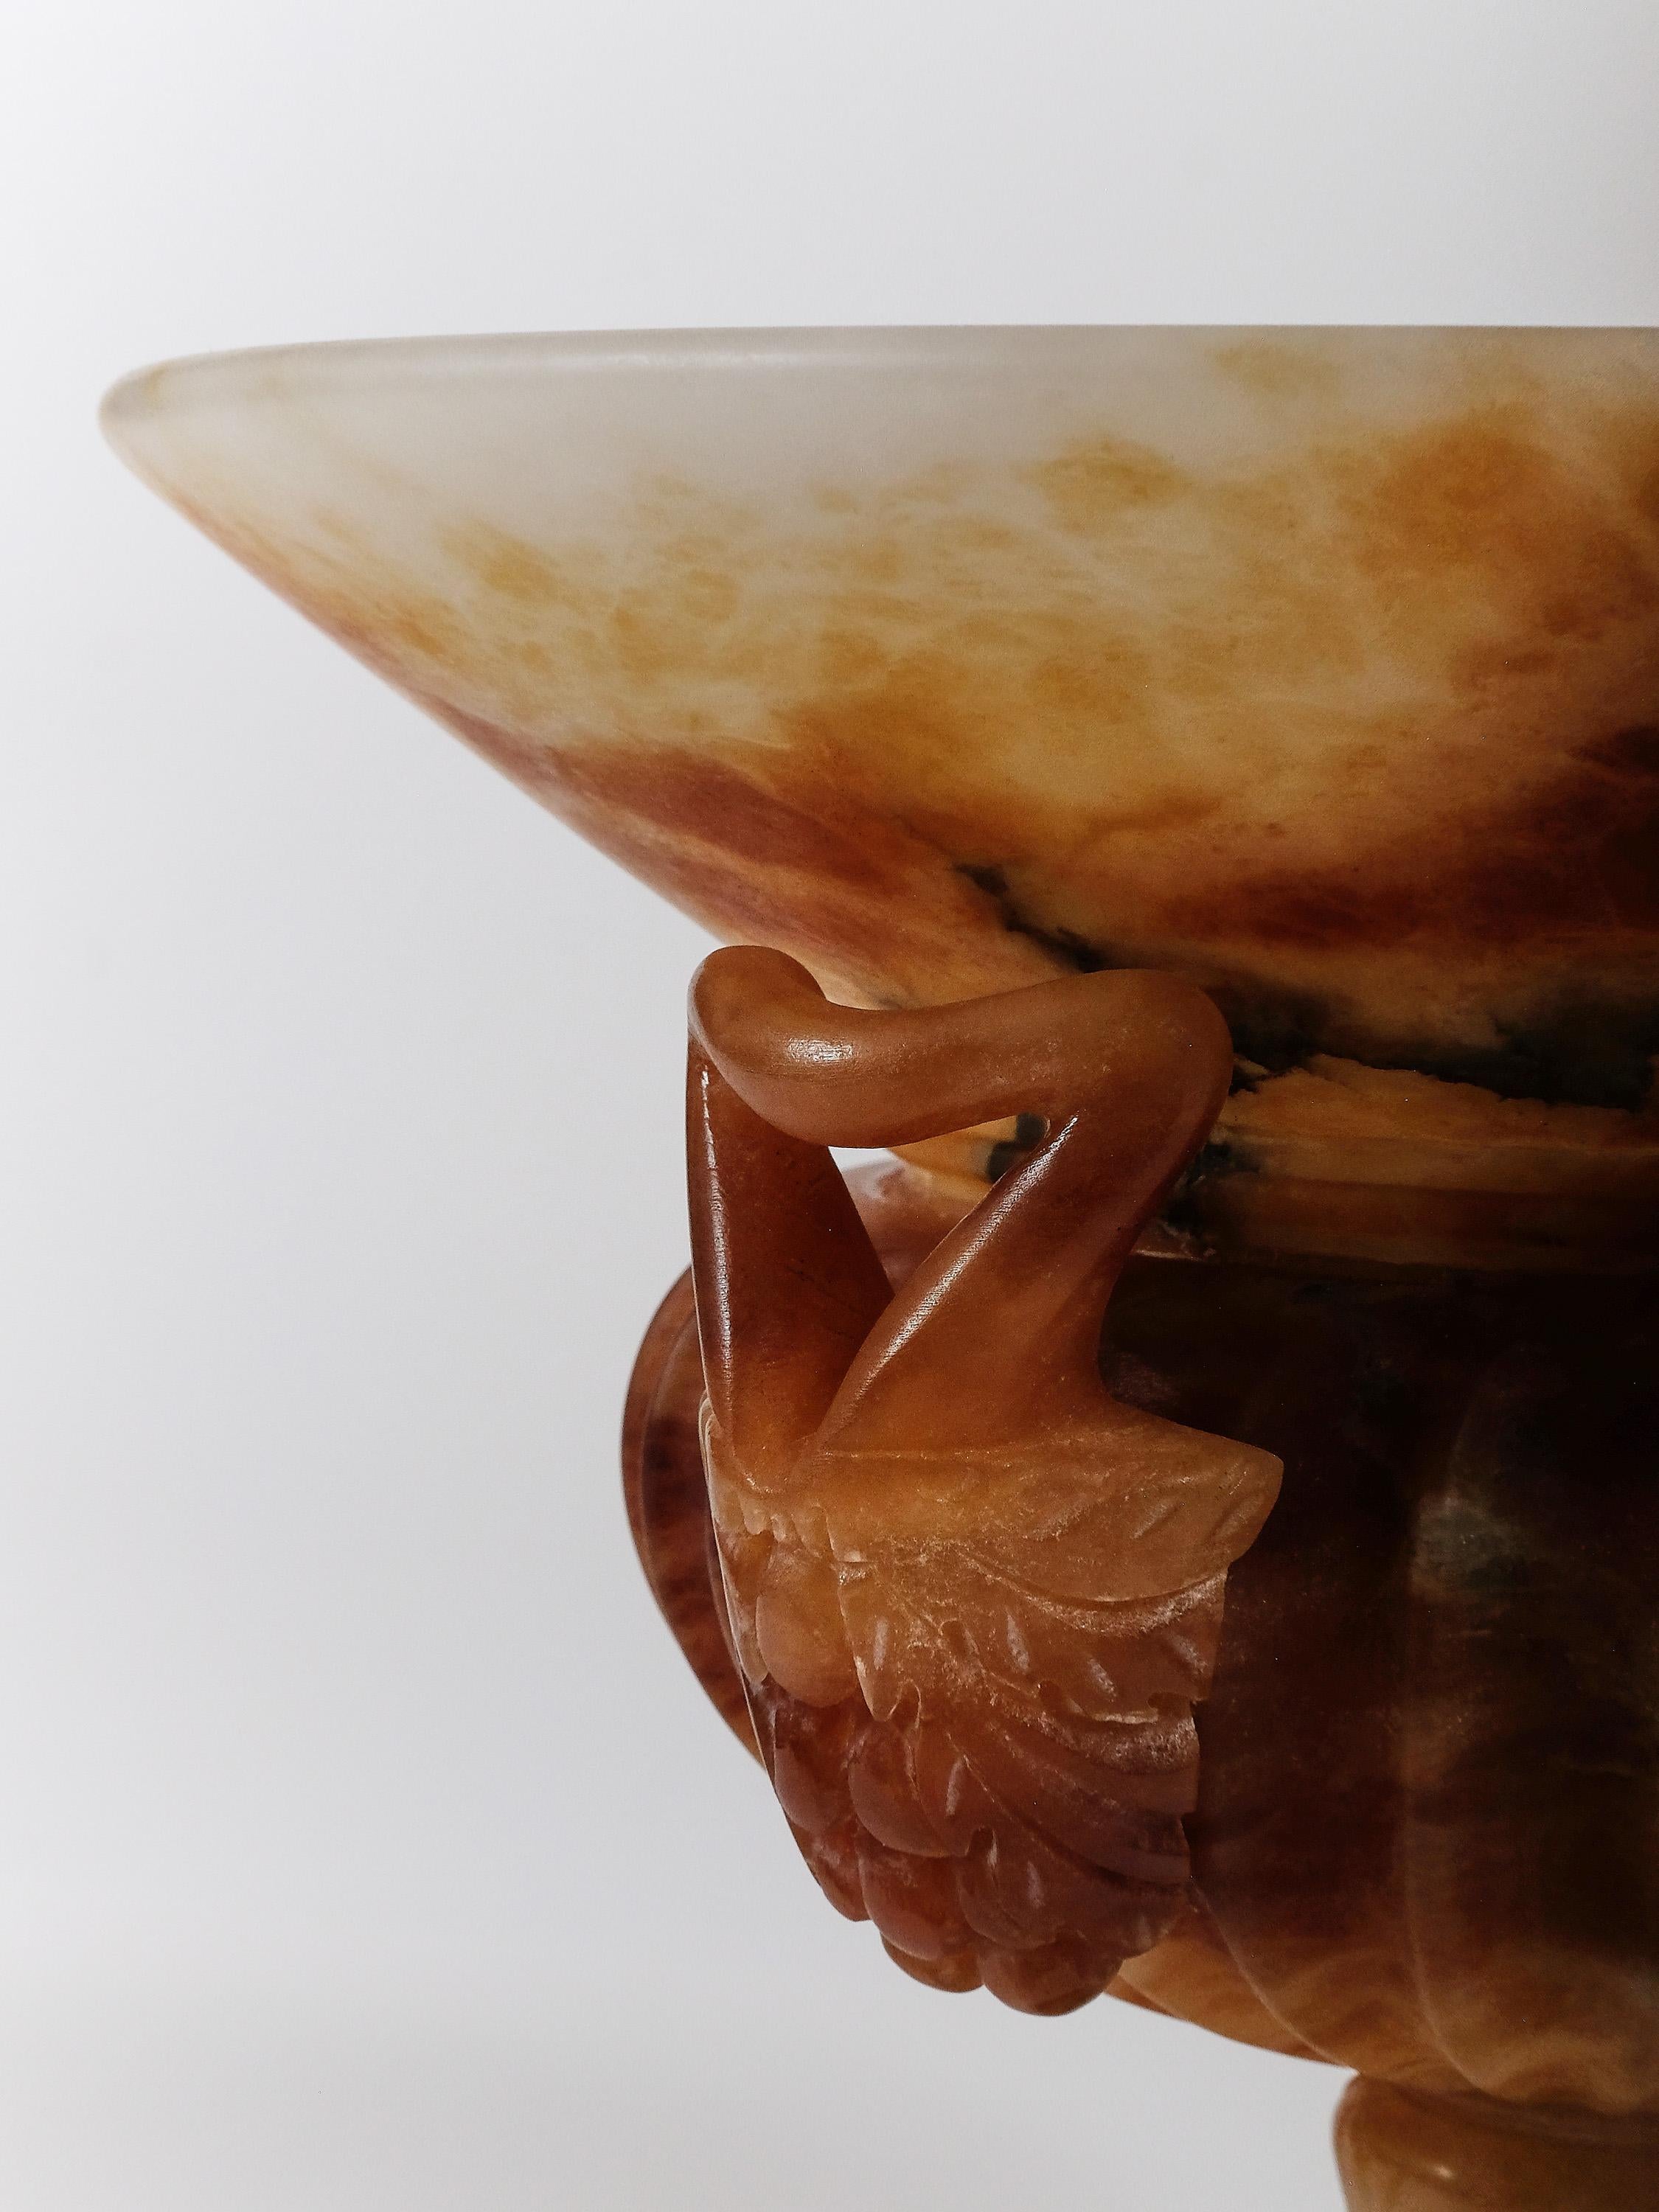 From the mountains of Tuscany comes this beautifully crafted alabaster urn, dyed in brown thus rendering the piece very translucent if placed under a light. Sober and elegant, it can house a plant, carry a candy extravaganza, or can be simply